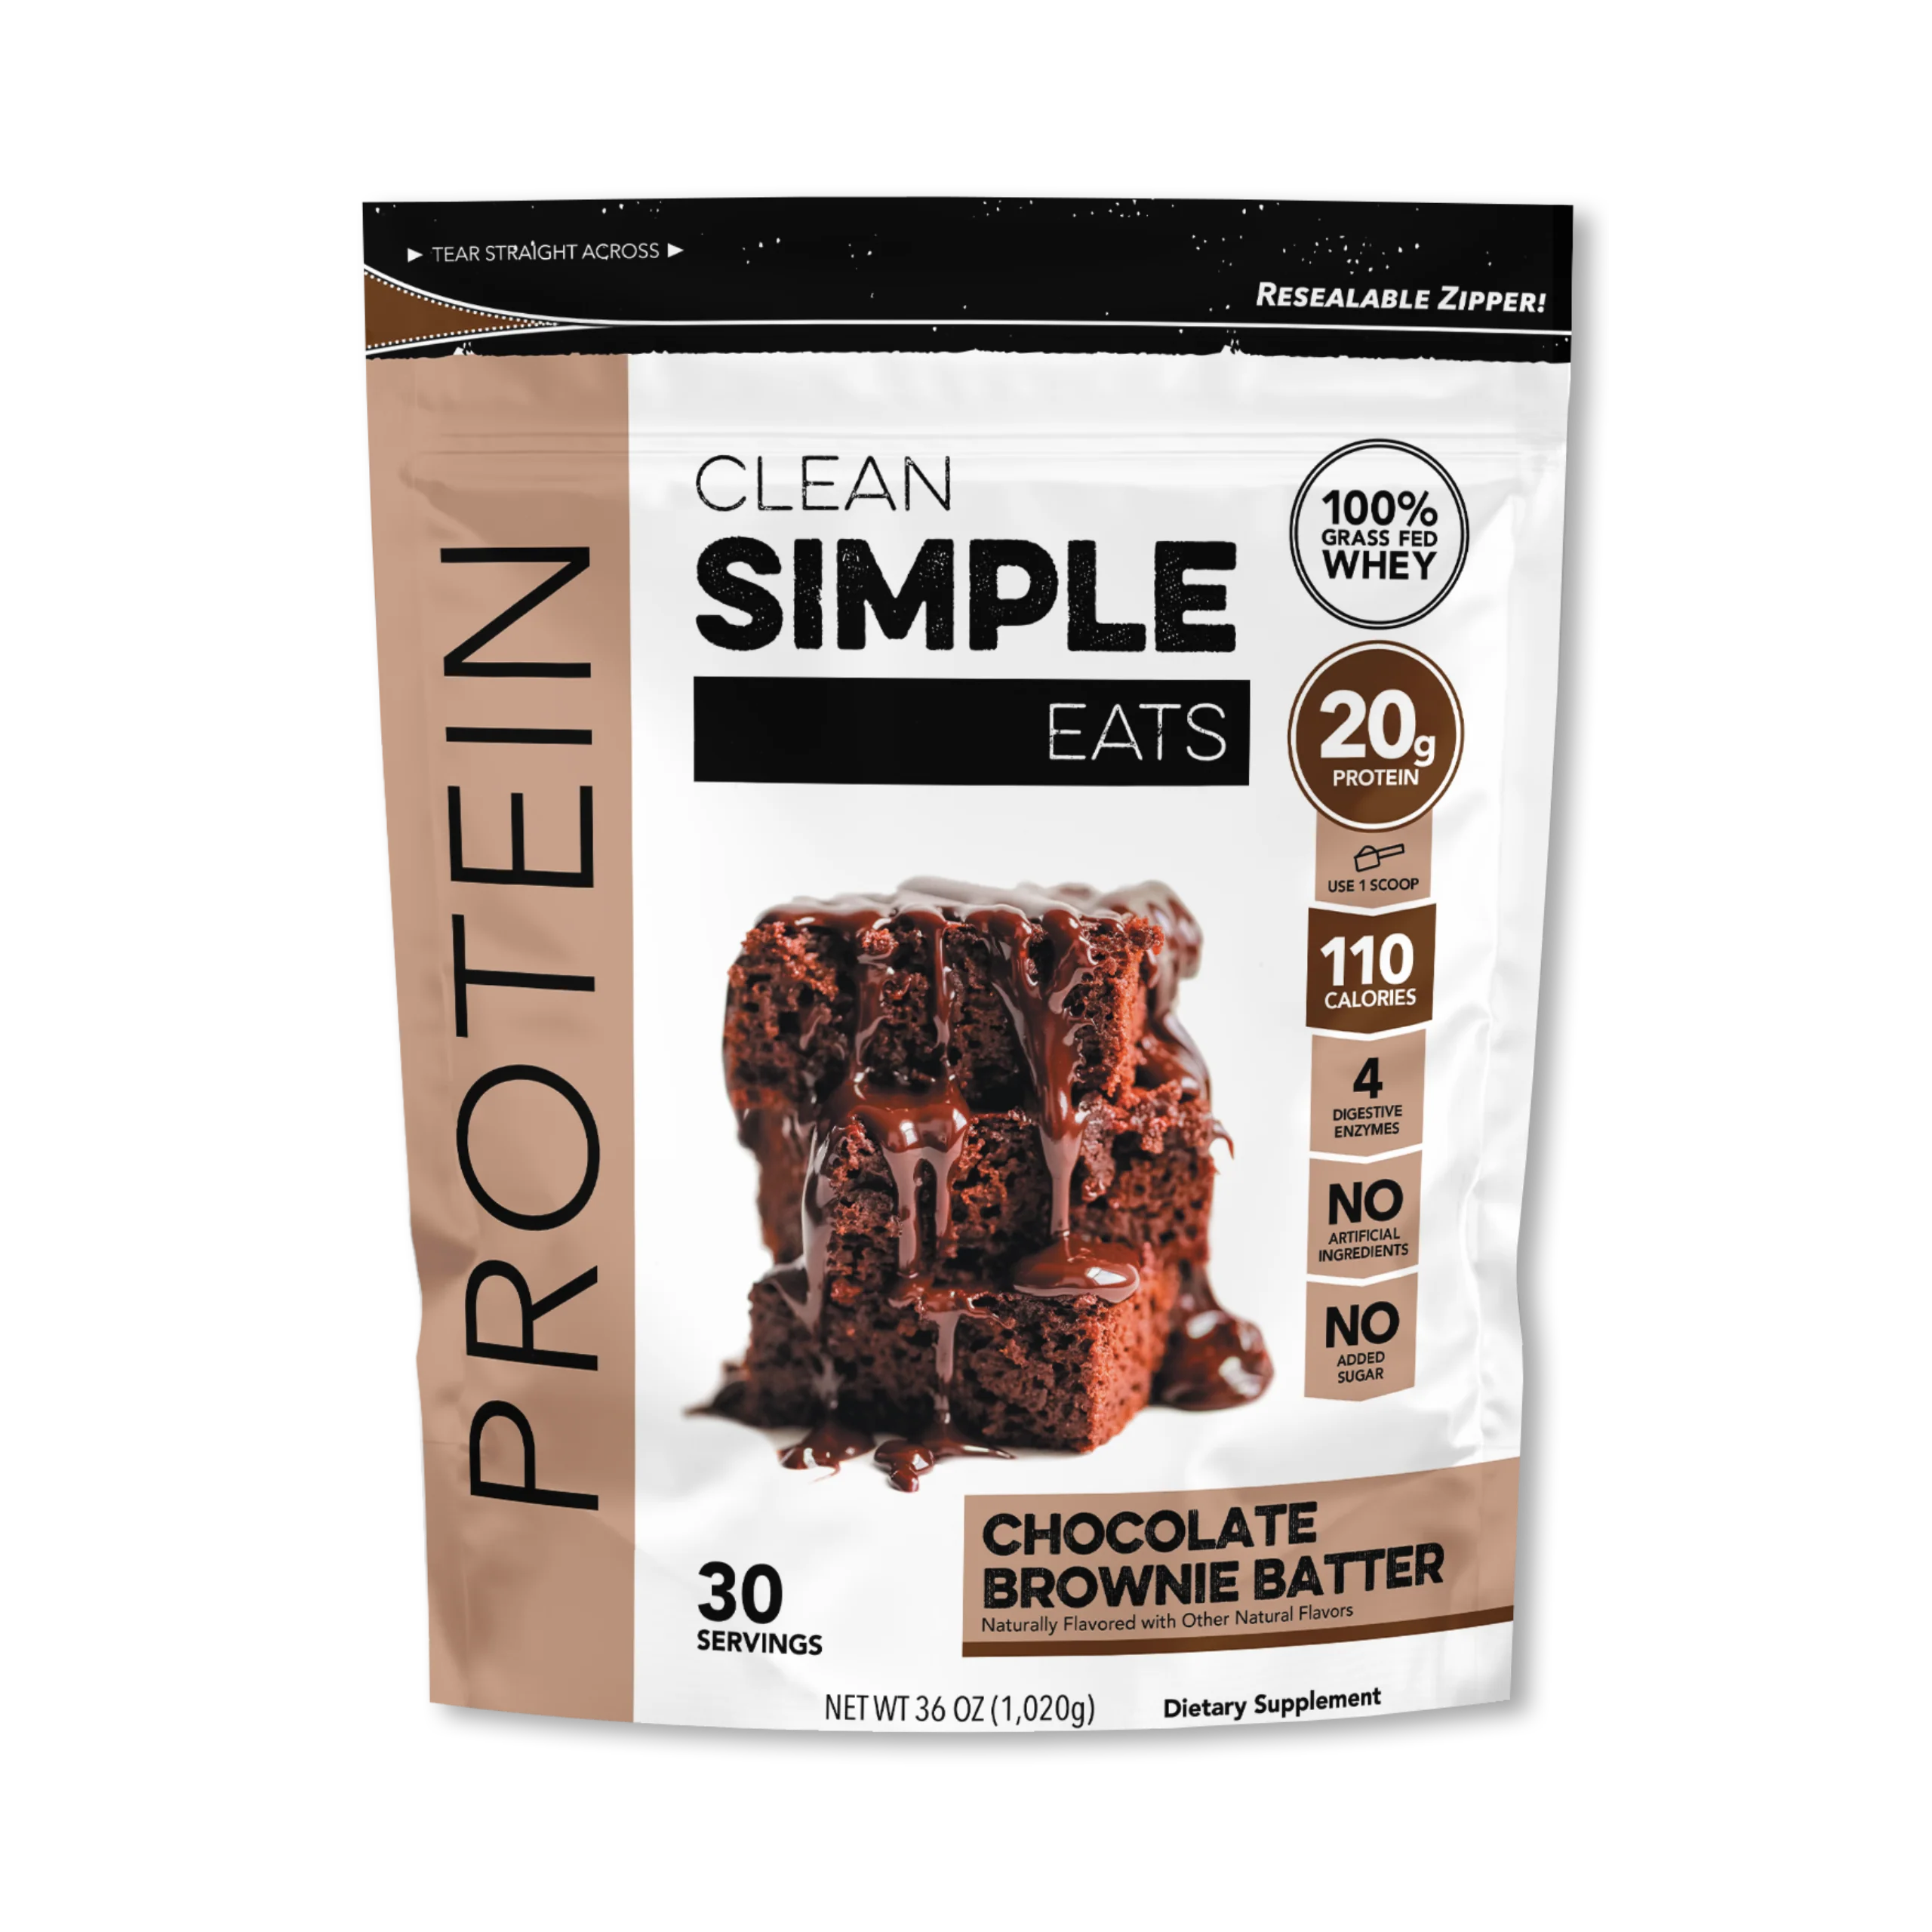 Clean Simple Eats Brownie Batter- 10% off with code: pounddropper